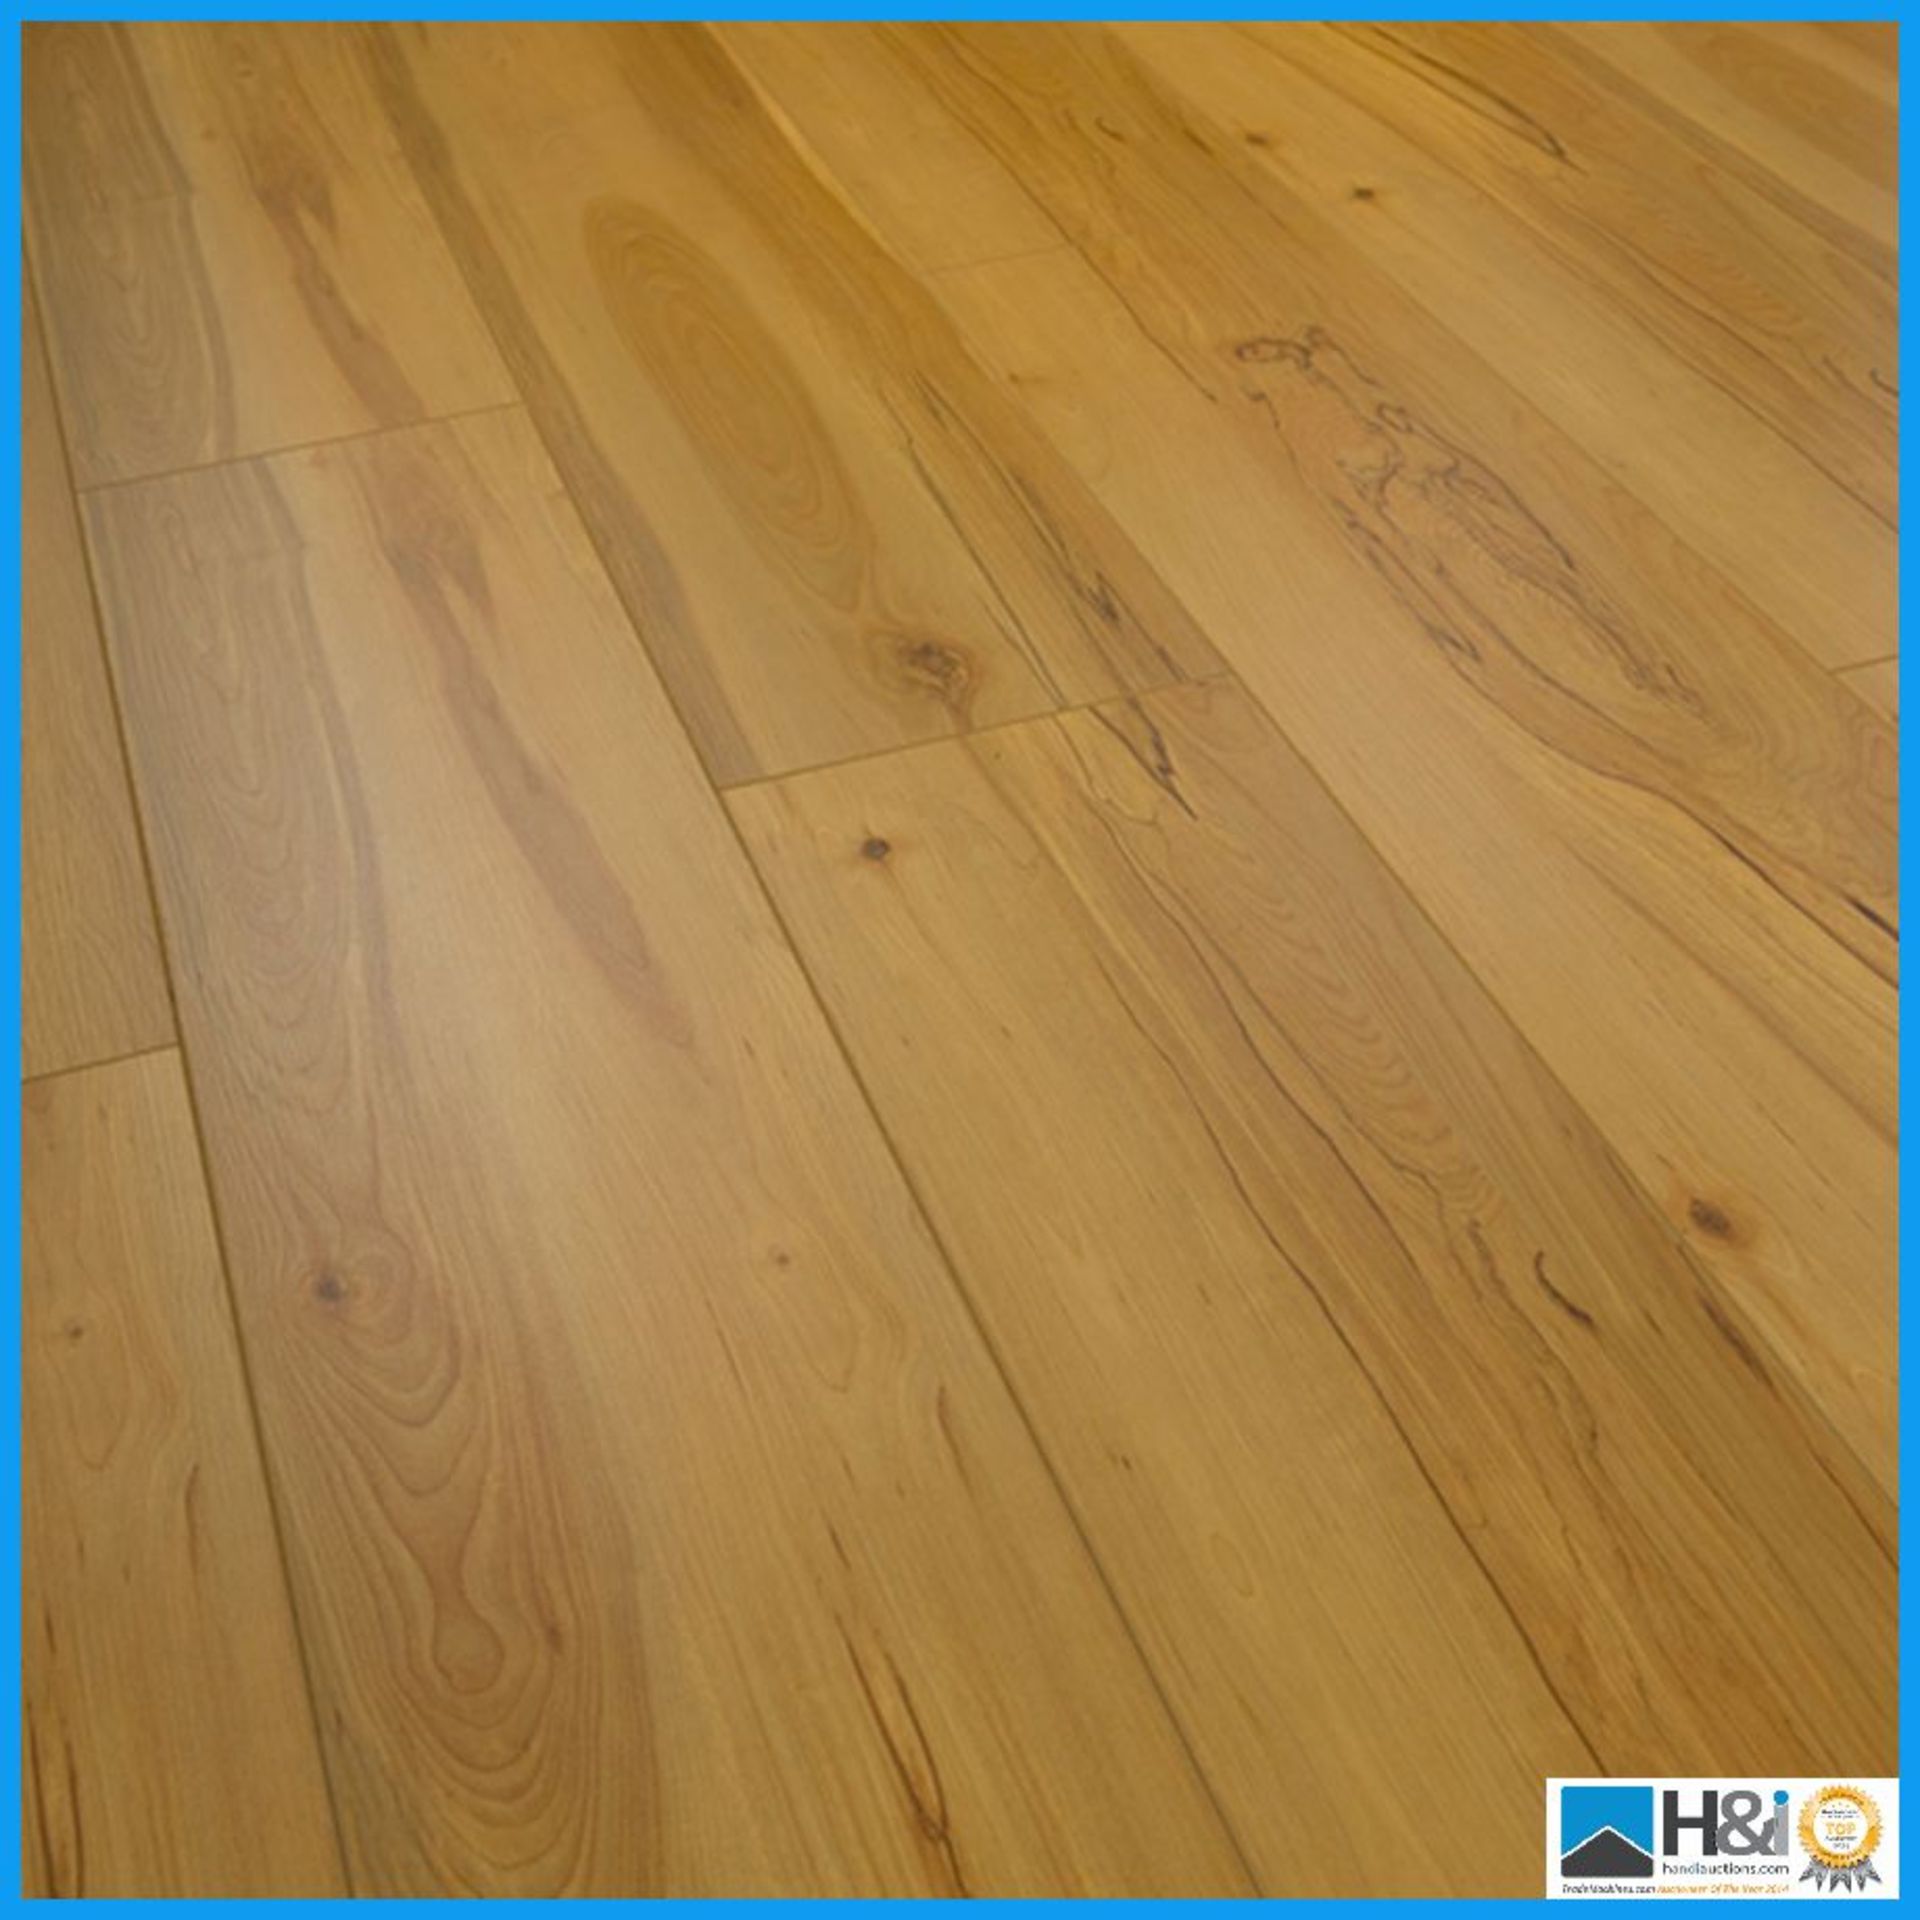 Laminate euro floor 8mm - colour -natures beech (4 packs x 2.73375sqm packs = 10.94sqm) RRP £25.99 - Image 2 of 2